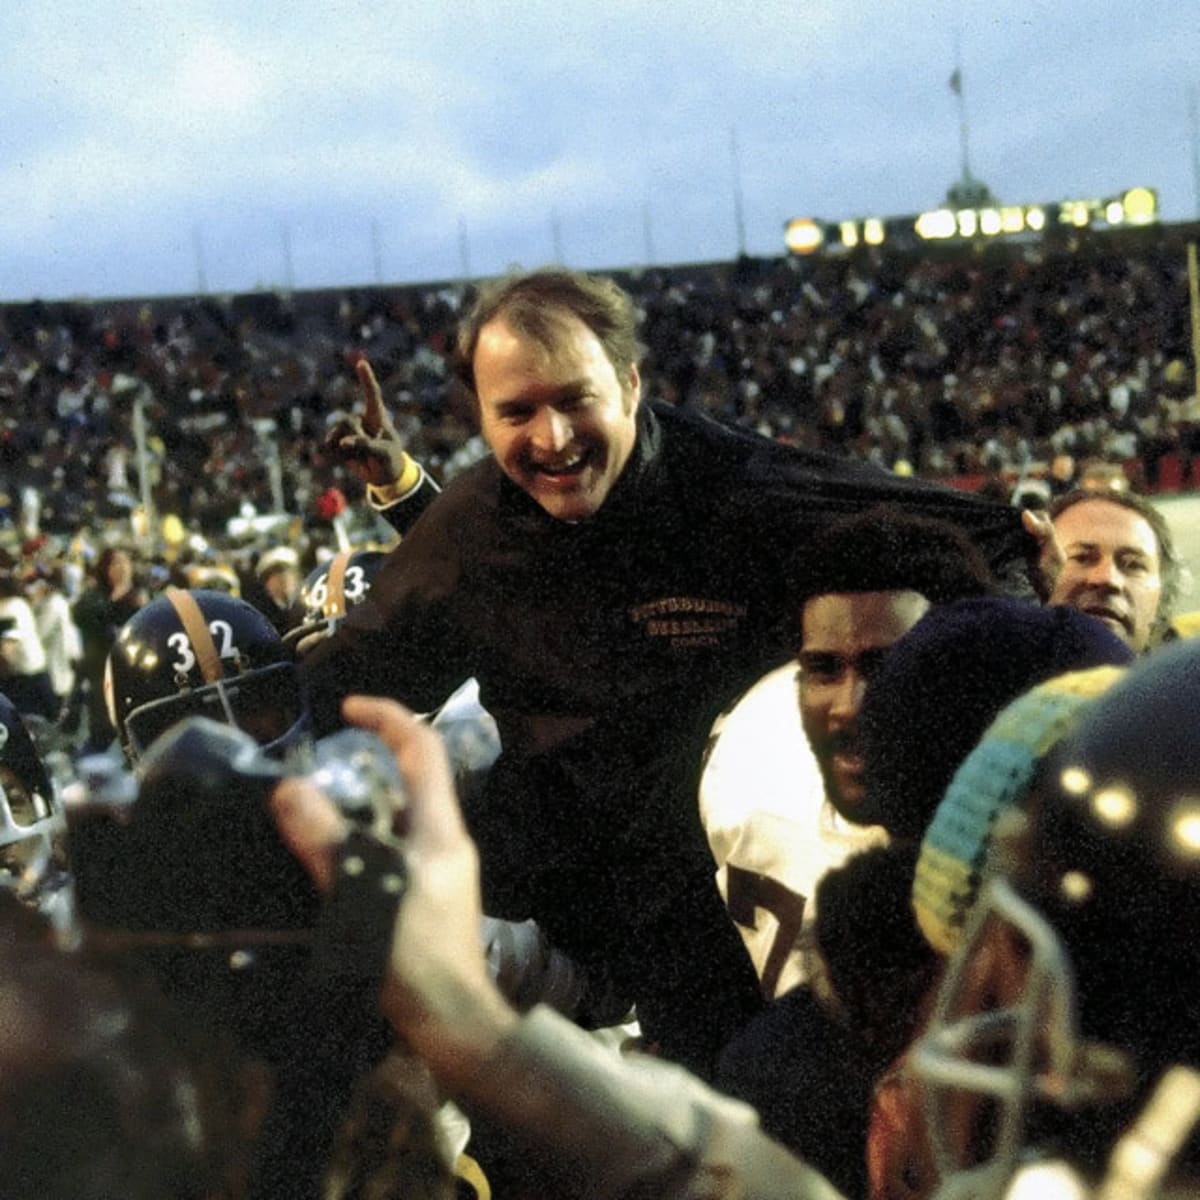 Hall of Fame coach Chuck Noll dead at 82